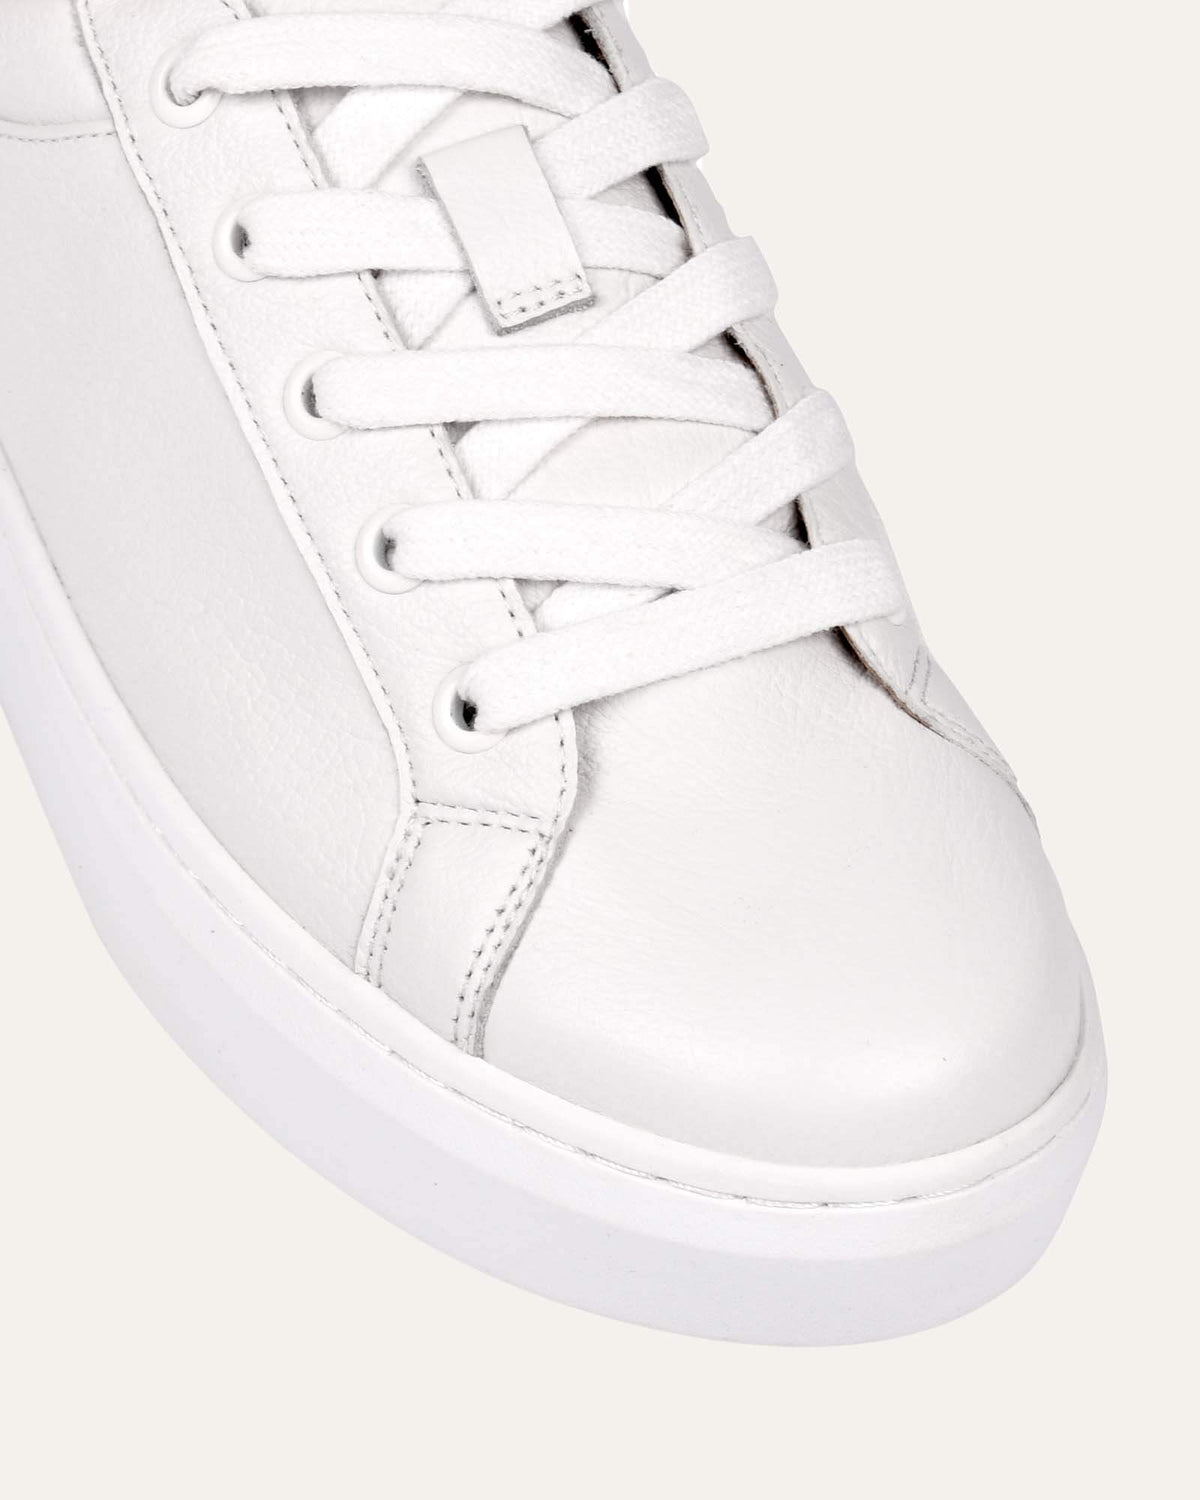 HILDA SNEAKERS WHITE LEATHER